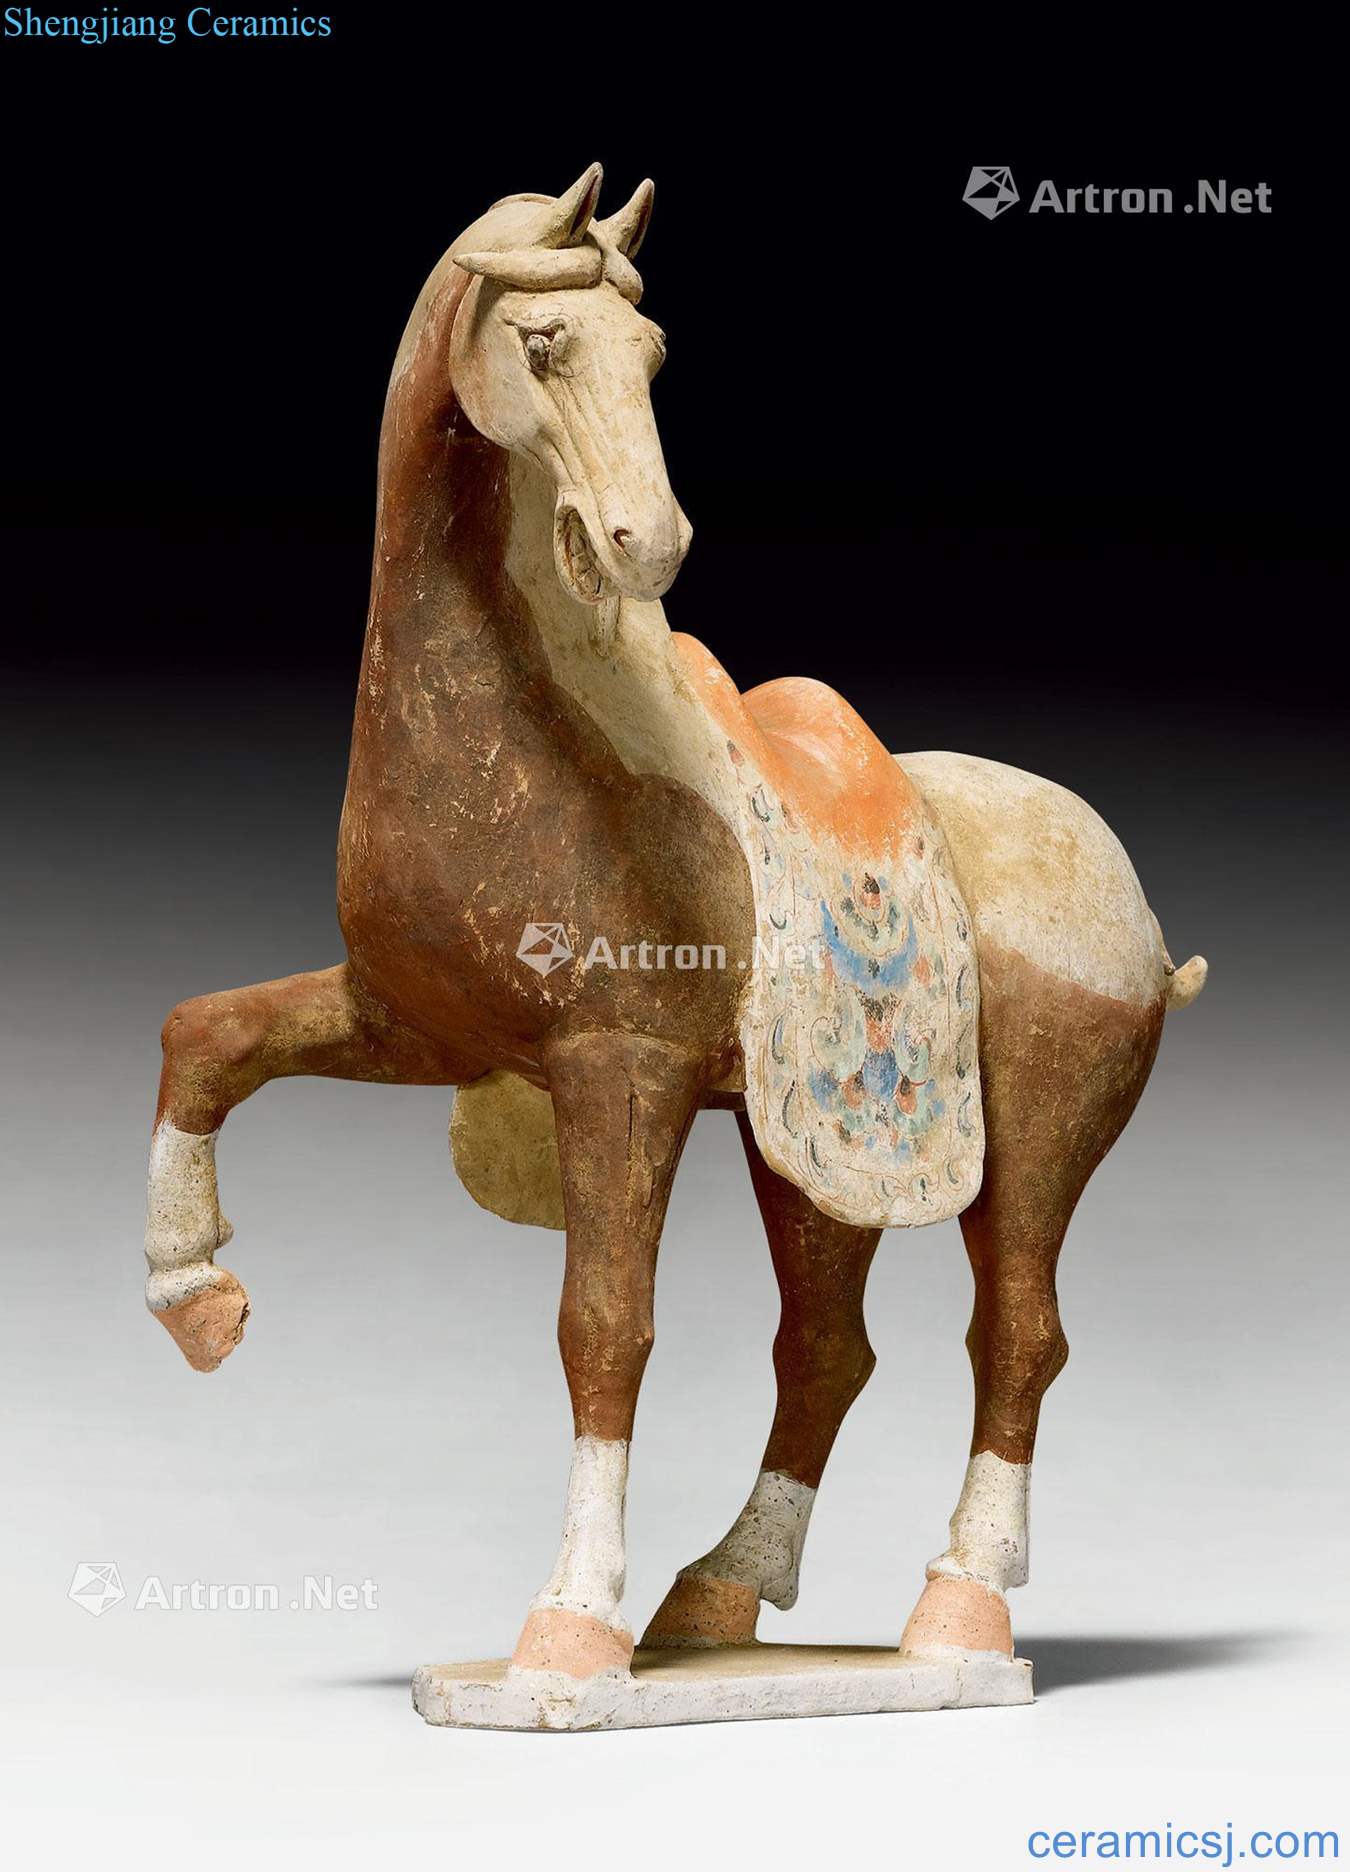 Tang dynasty made A POTTERY FIGURE OF A PRANCING HORSE.